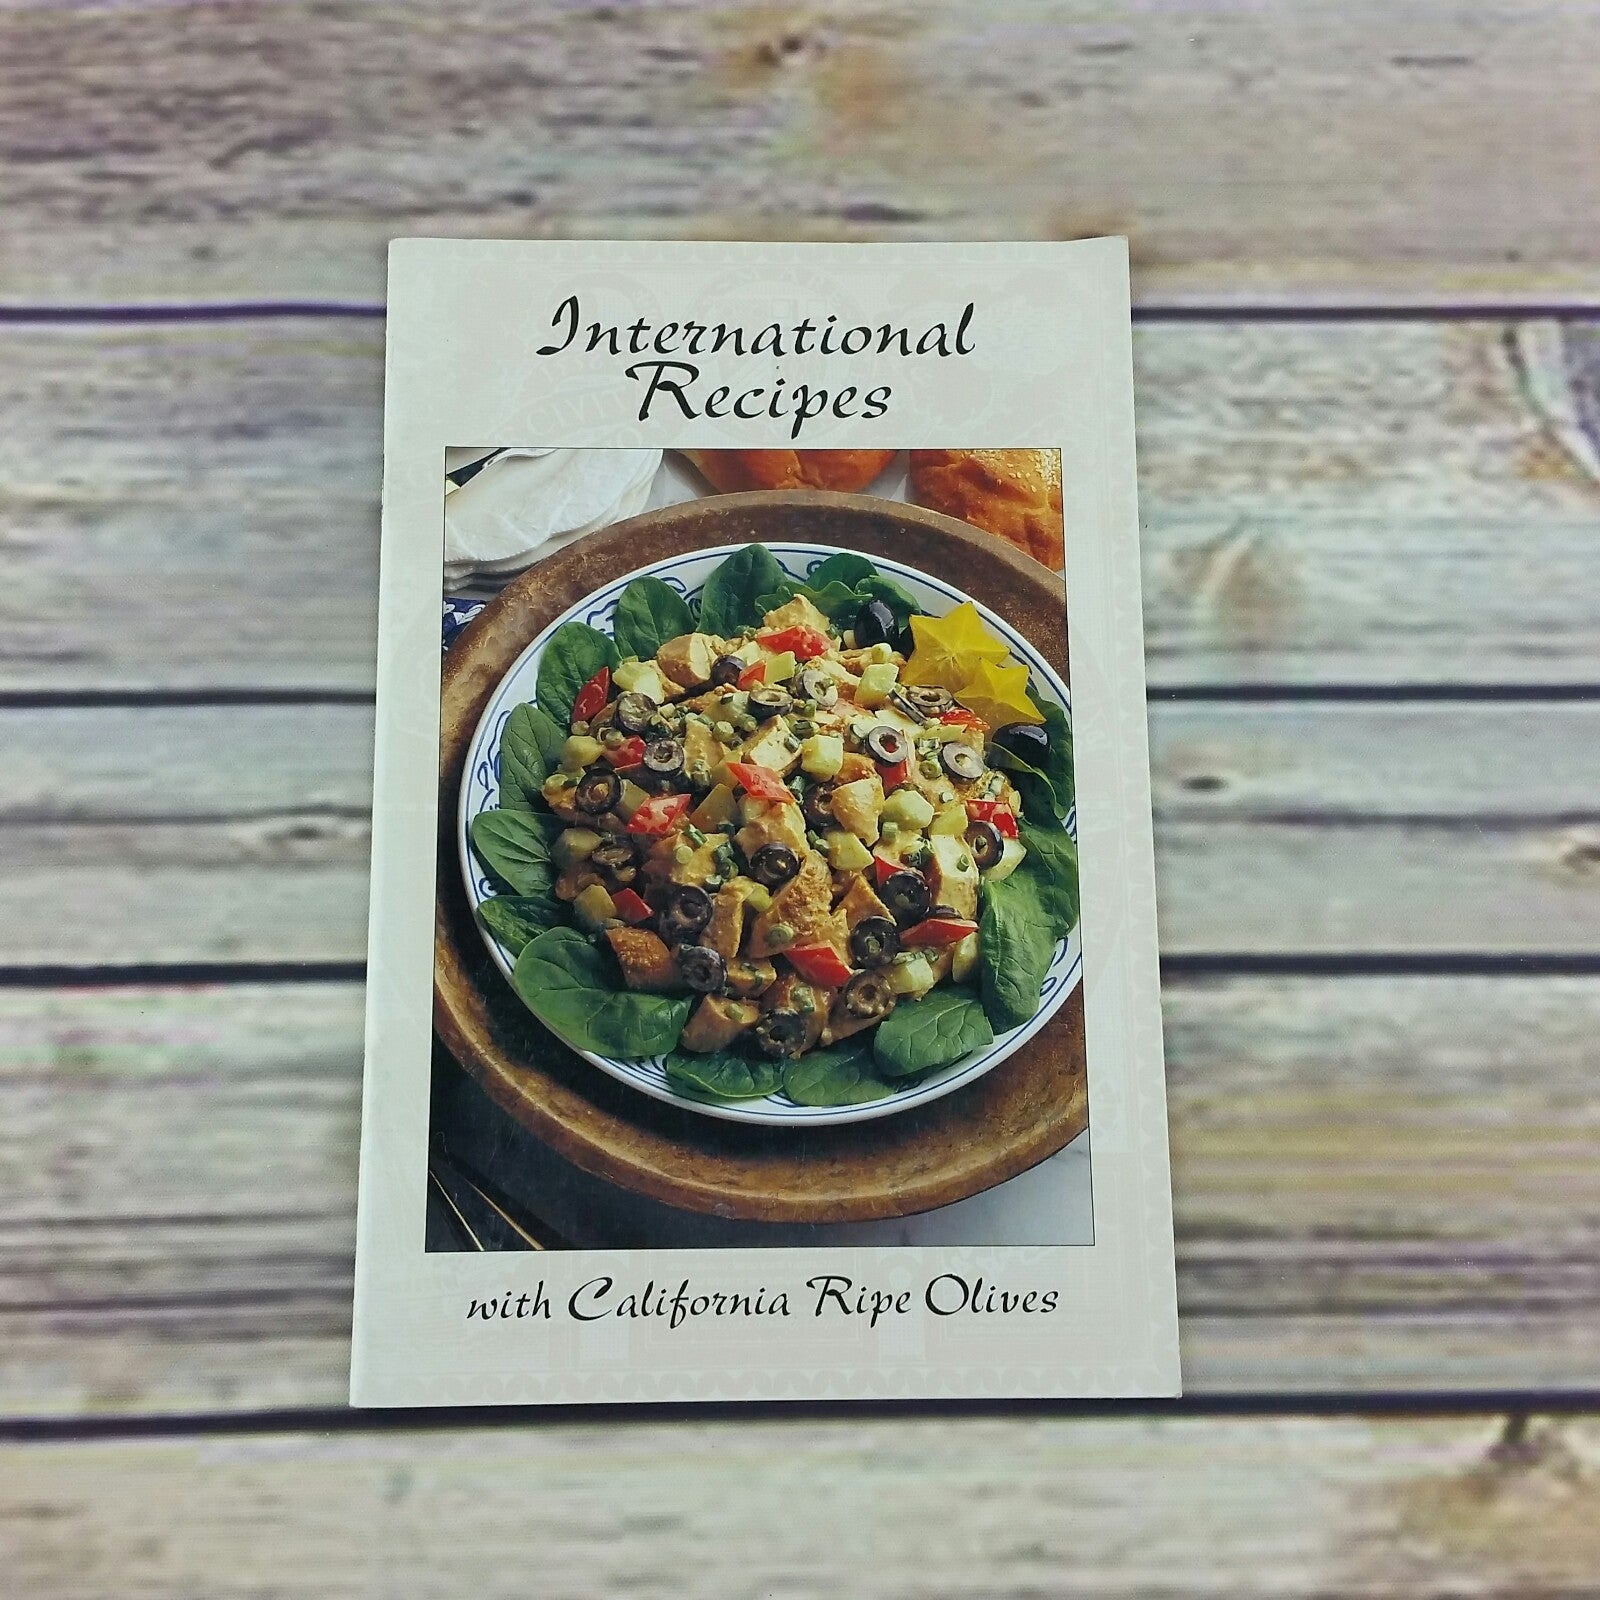 Vintage California Cookbook International Recipes with Olives 1994 Booklet - At Grandma's Table